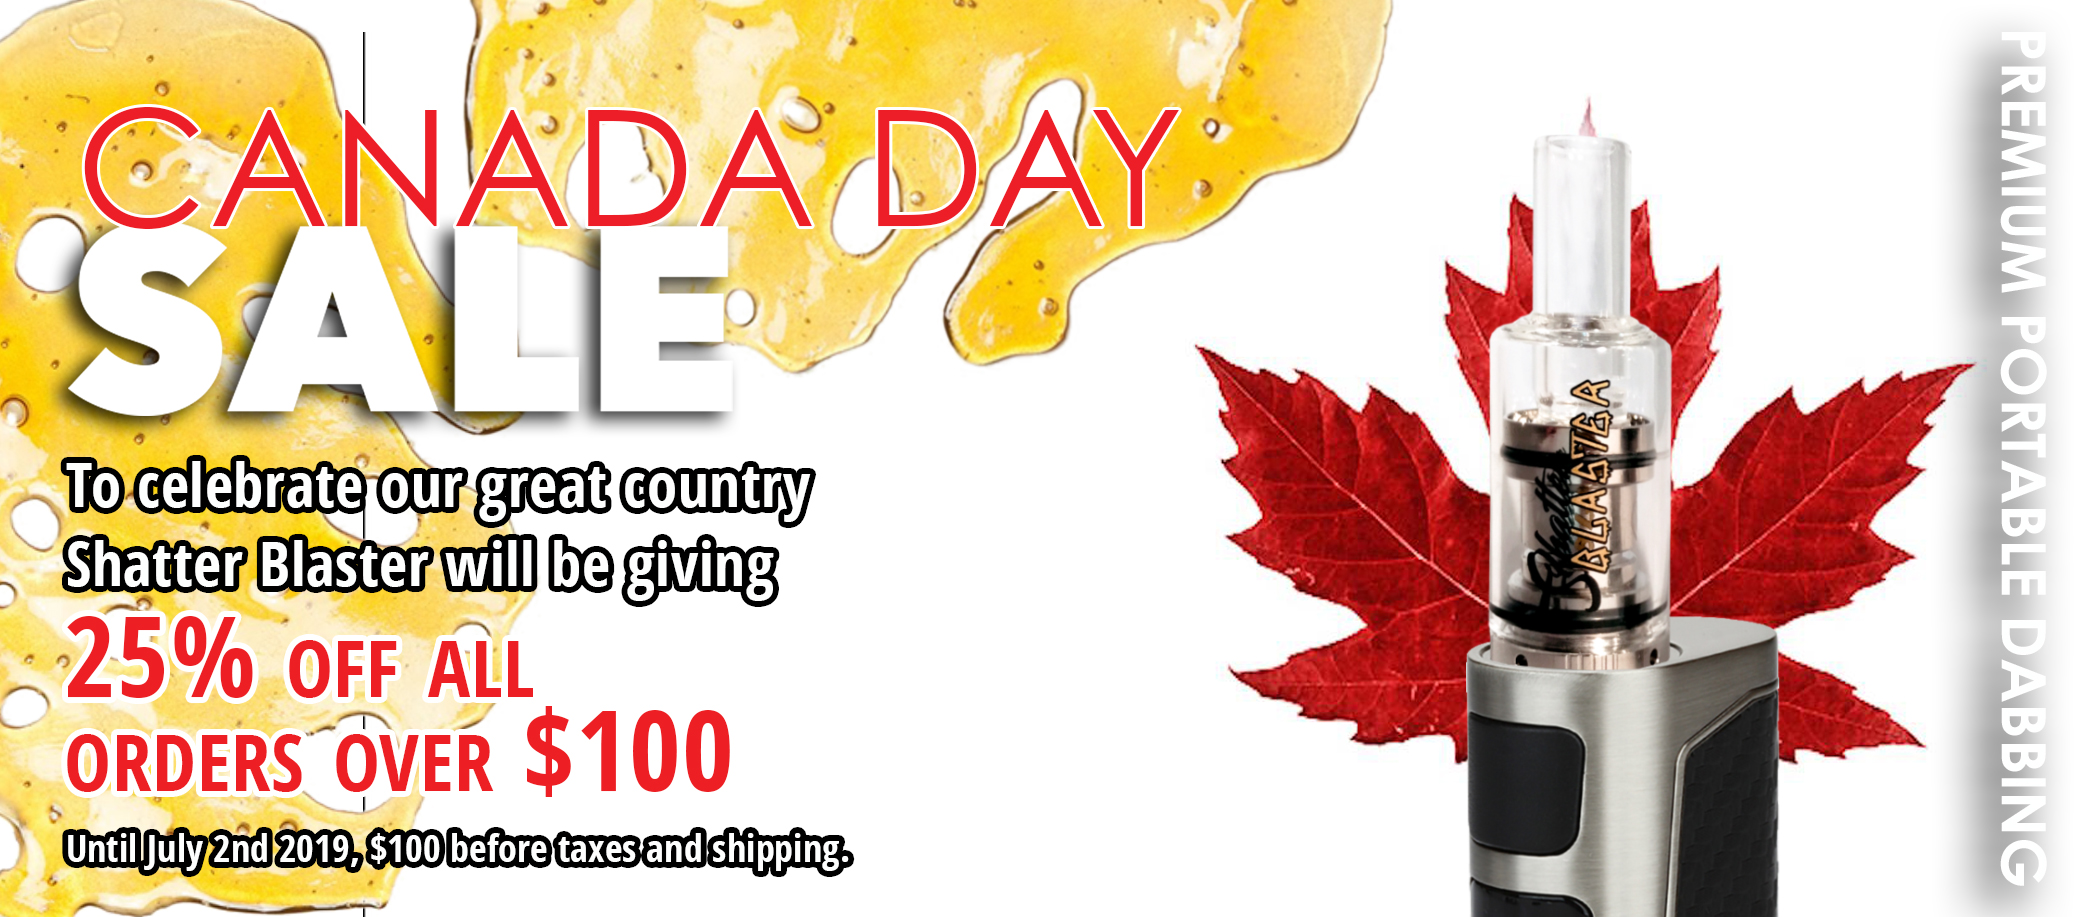 Our Biggest Sale Yet! We love you Canada!